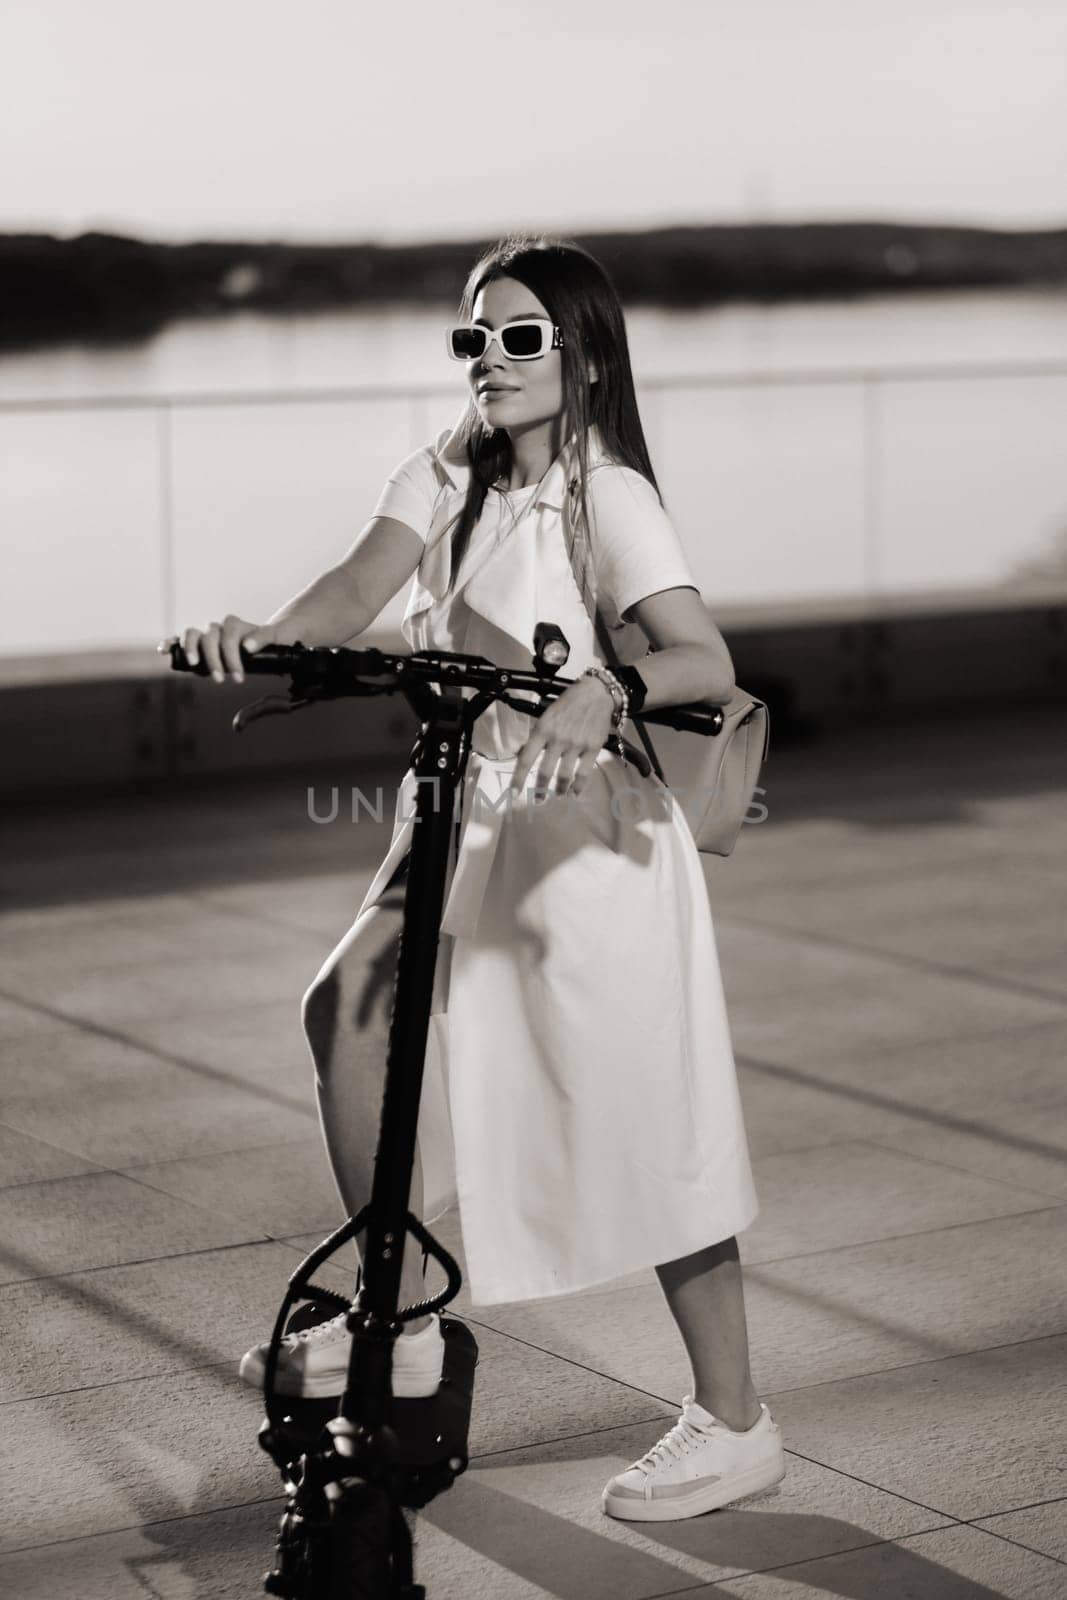 Stylish girl in glasses and a white summer coat in the city on an electric scooter.